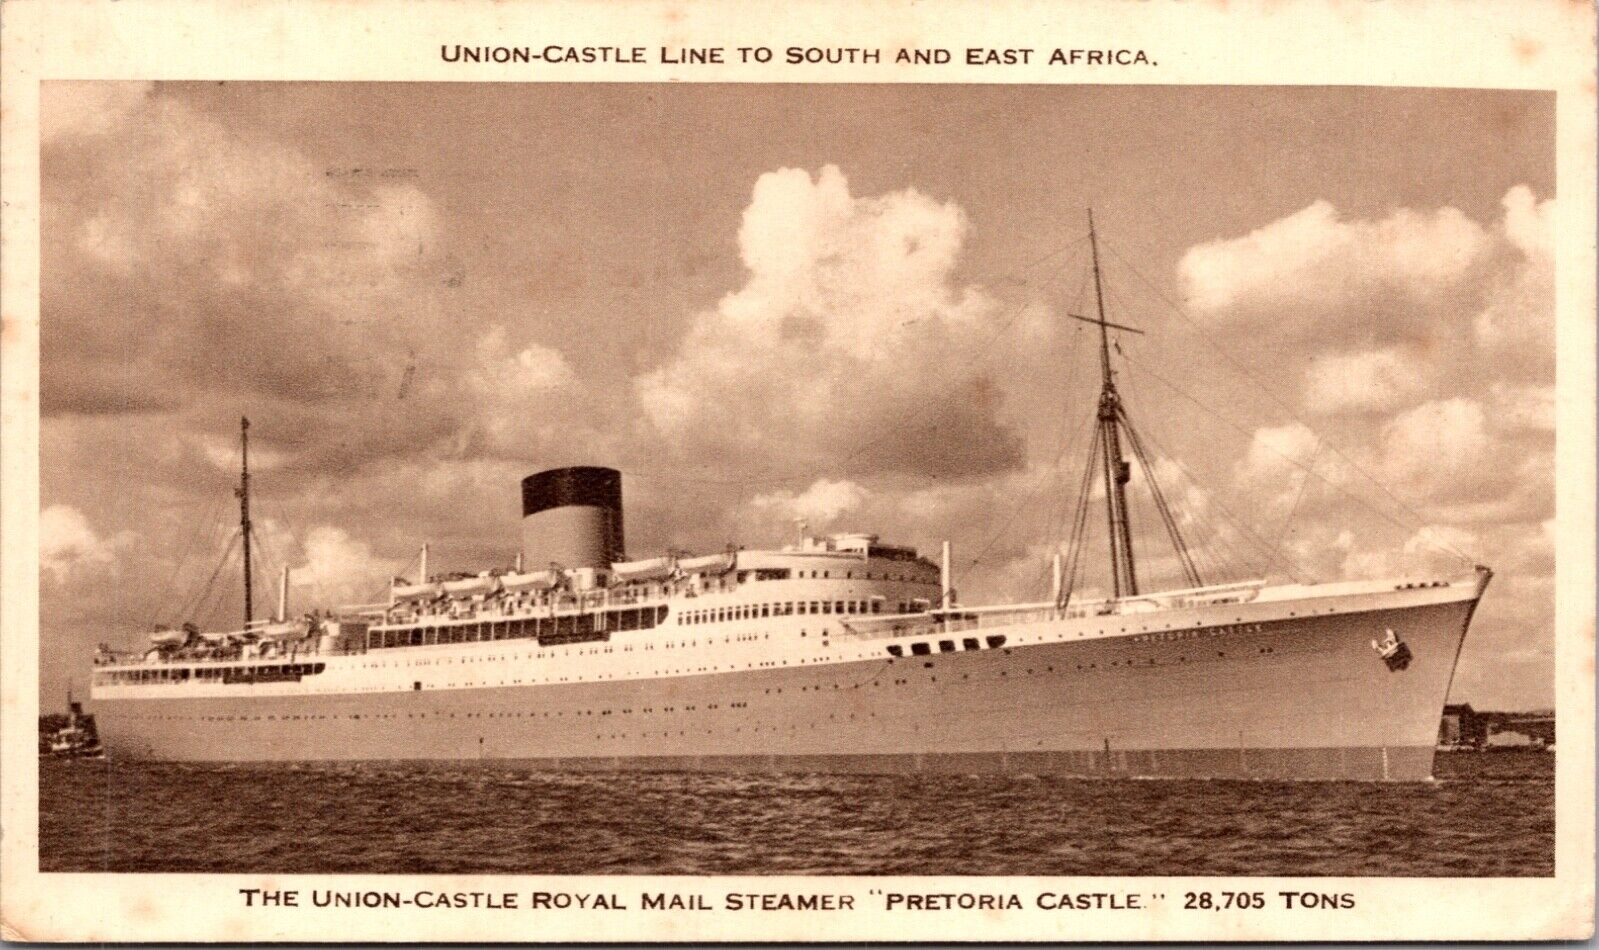 PC Union-Castle Line to South and East Africa Royal Mail Steamer Pretoria Castle